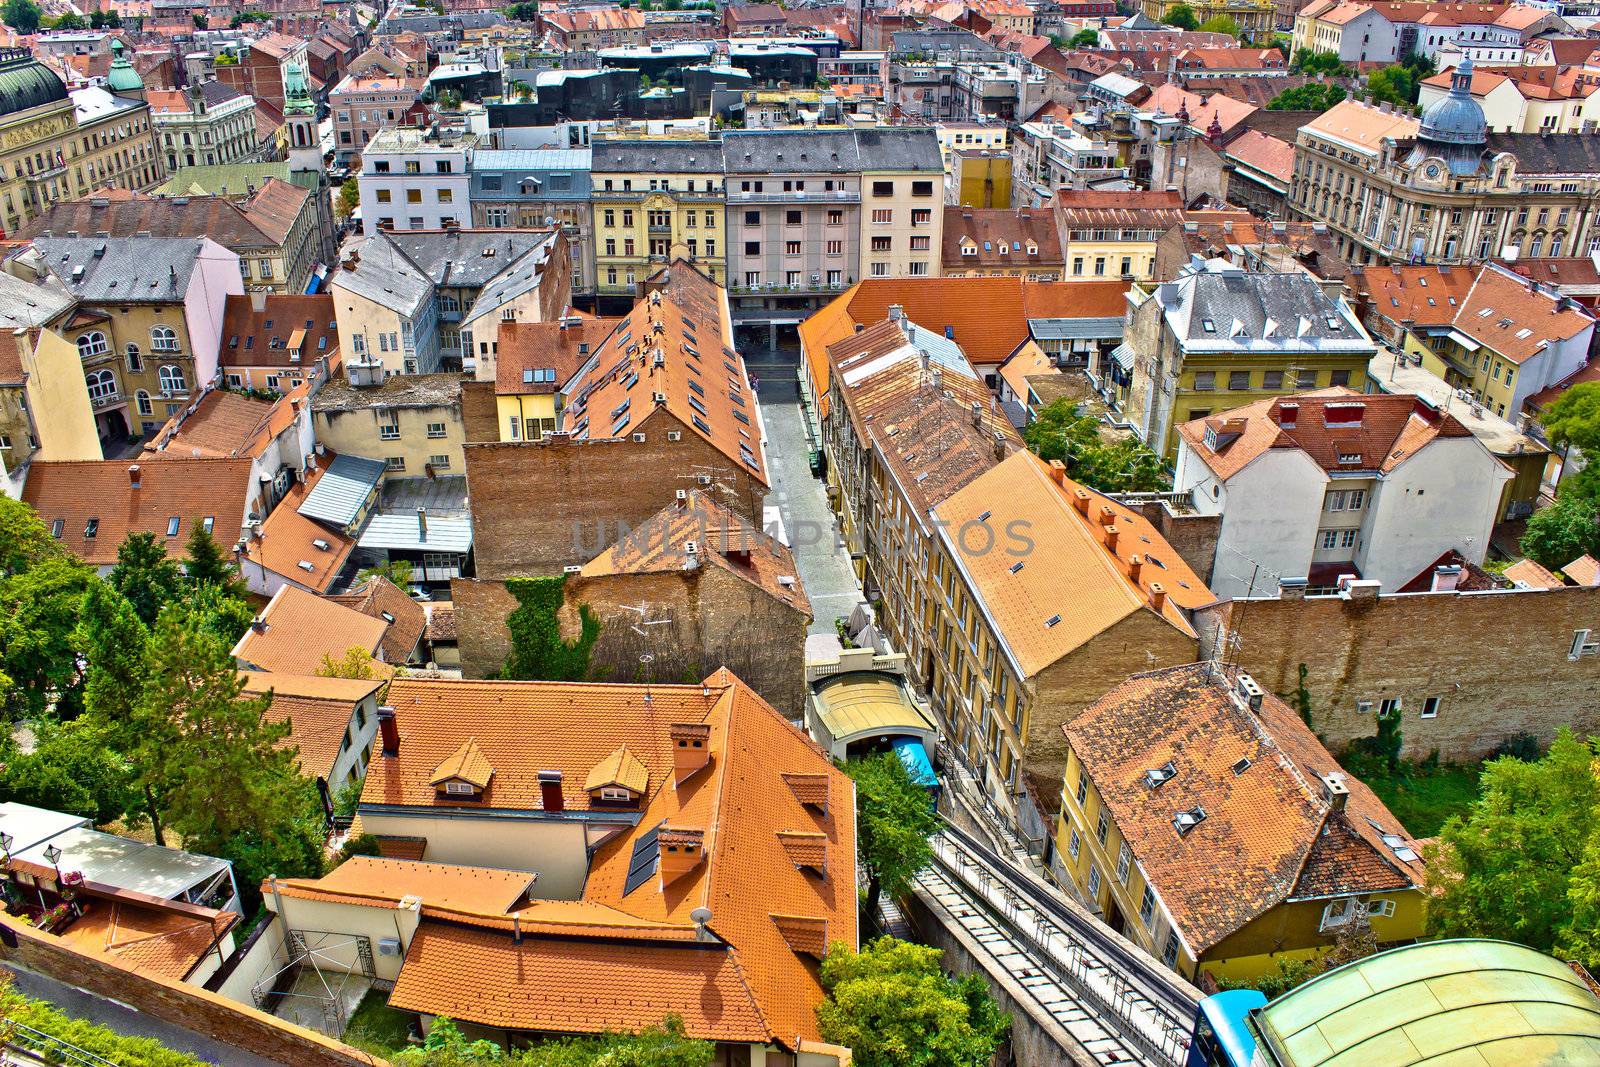 Capital of Croatia, City of Zagreb - historic lower town architecture & rooftops